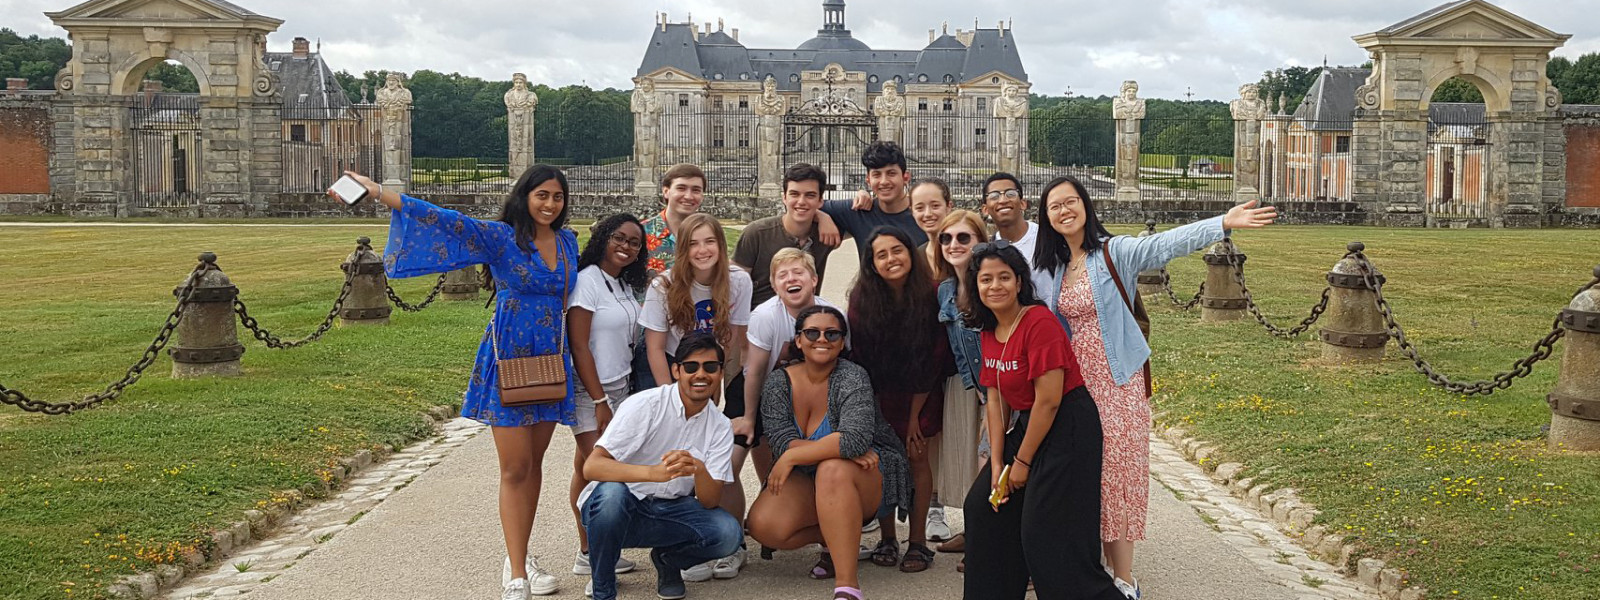 Fifteen students pose on a path in front of the château. The students on either end of the group have their arms spread wide.